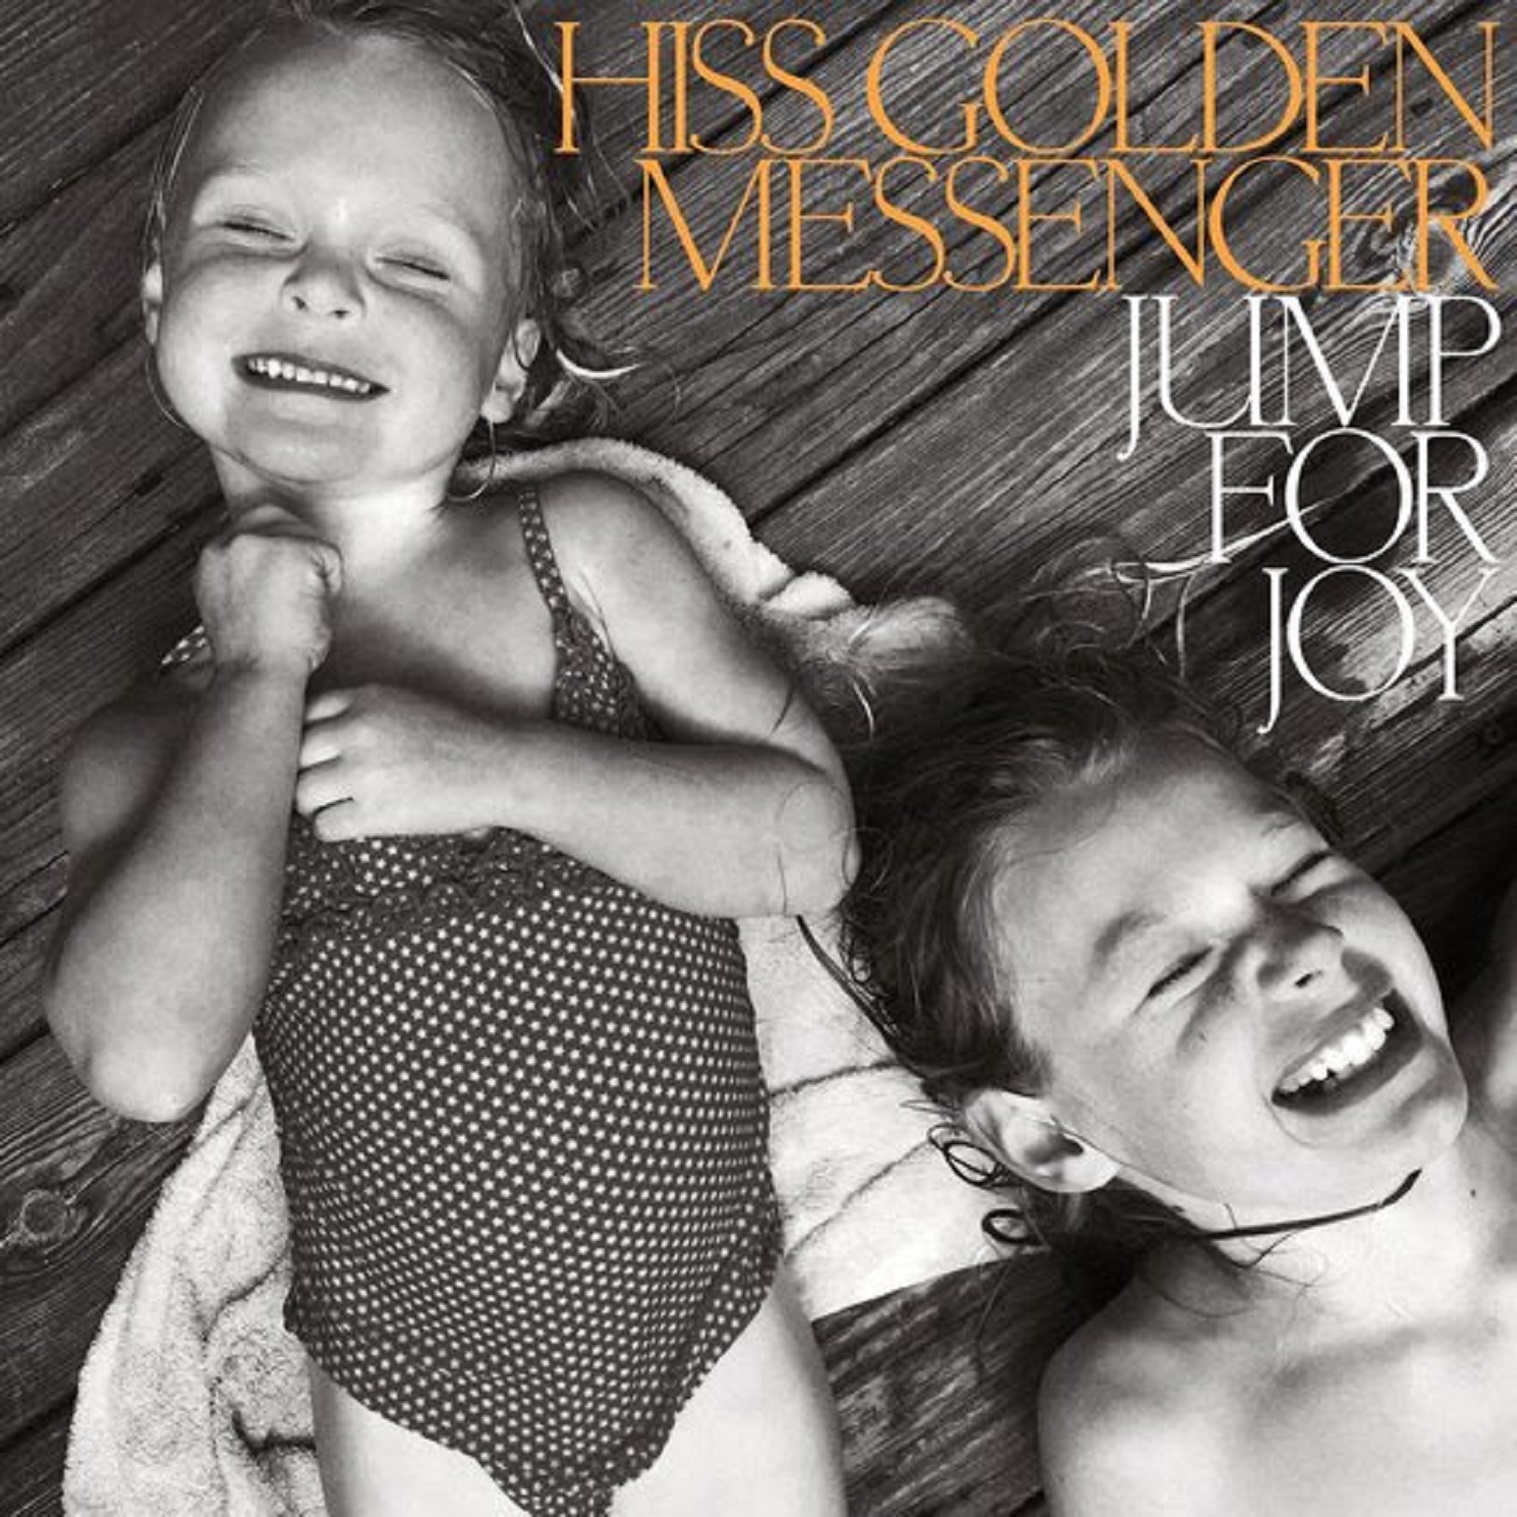 Hiss Golden Messenger Releases New Track "Shinbone" from the Highly Anticipated Album JUMP FOR JOY – Out August 25th